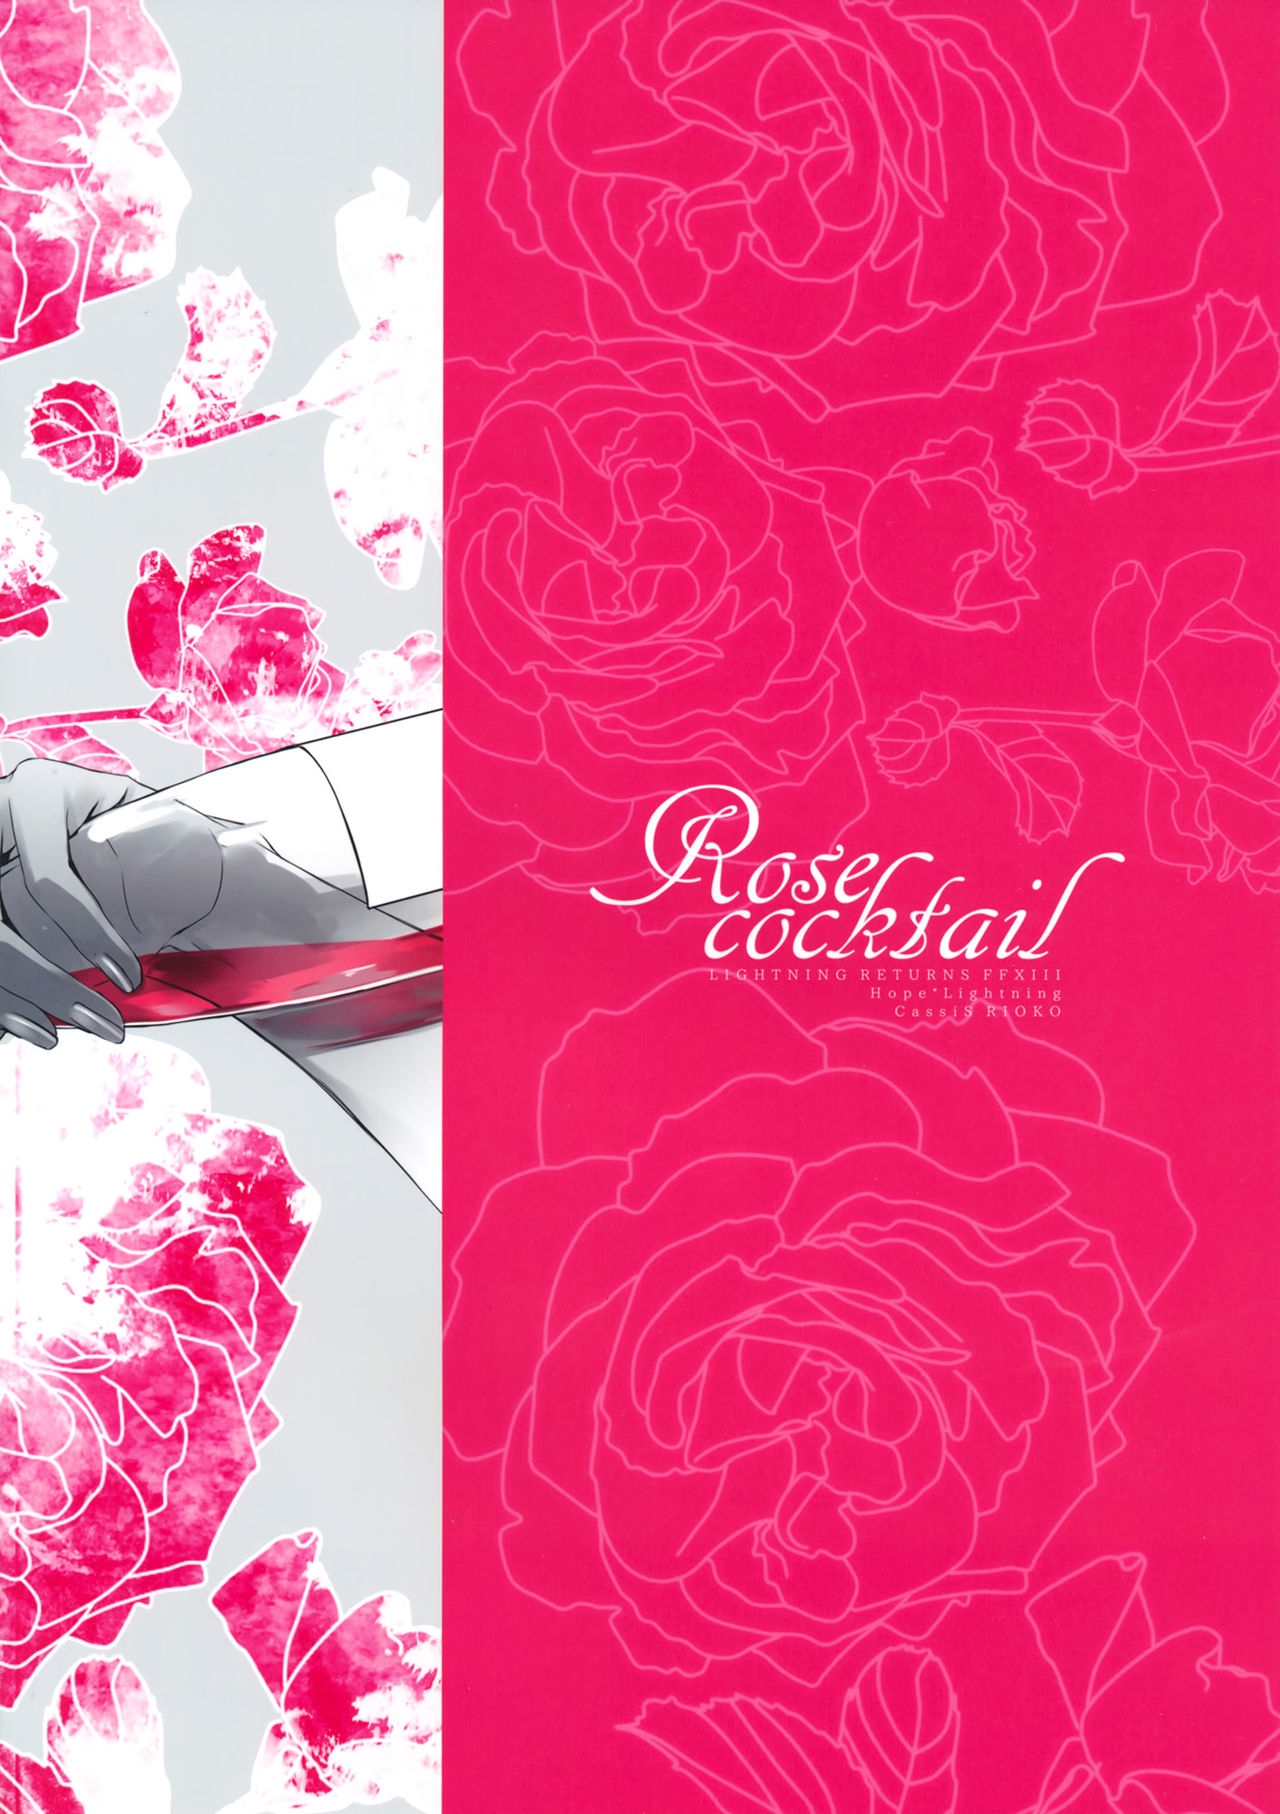 (C87) [CassiS (RIOKO)] Rose cocktail (Final Fantasy XIII) [Chinese] [临时义军] 2